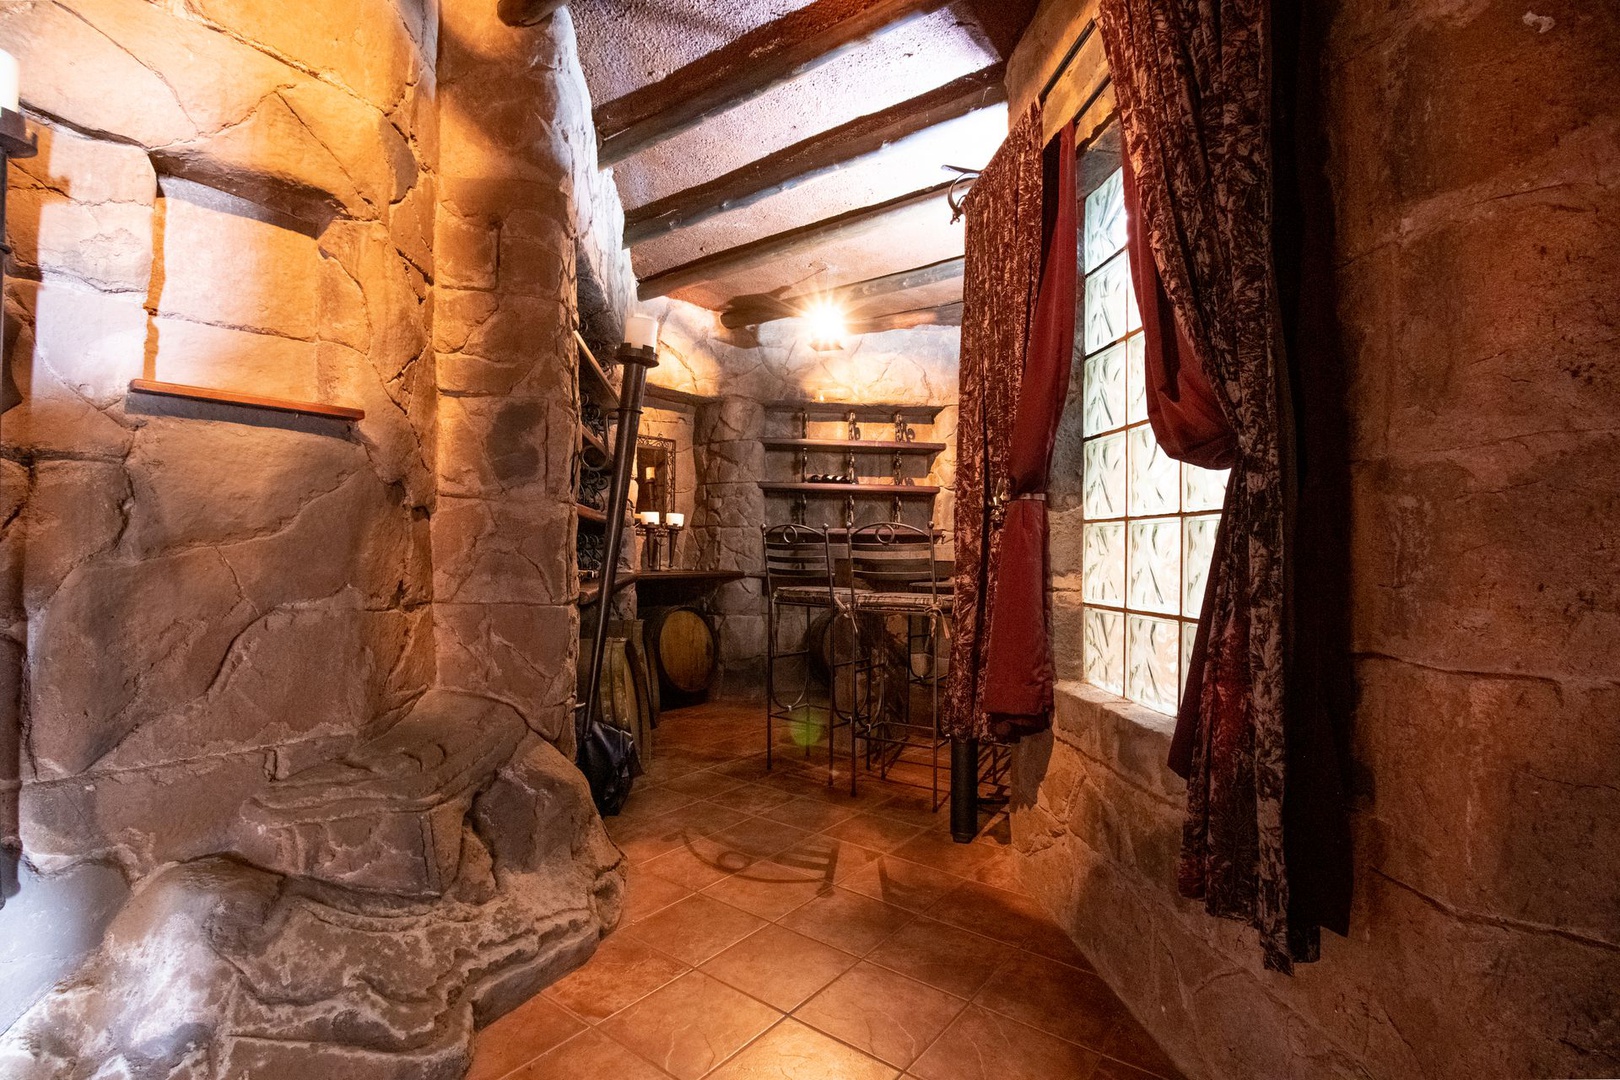 House in Kosmos - Exquisite wine cellar with delightful features!